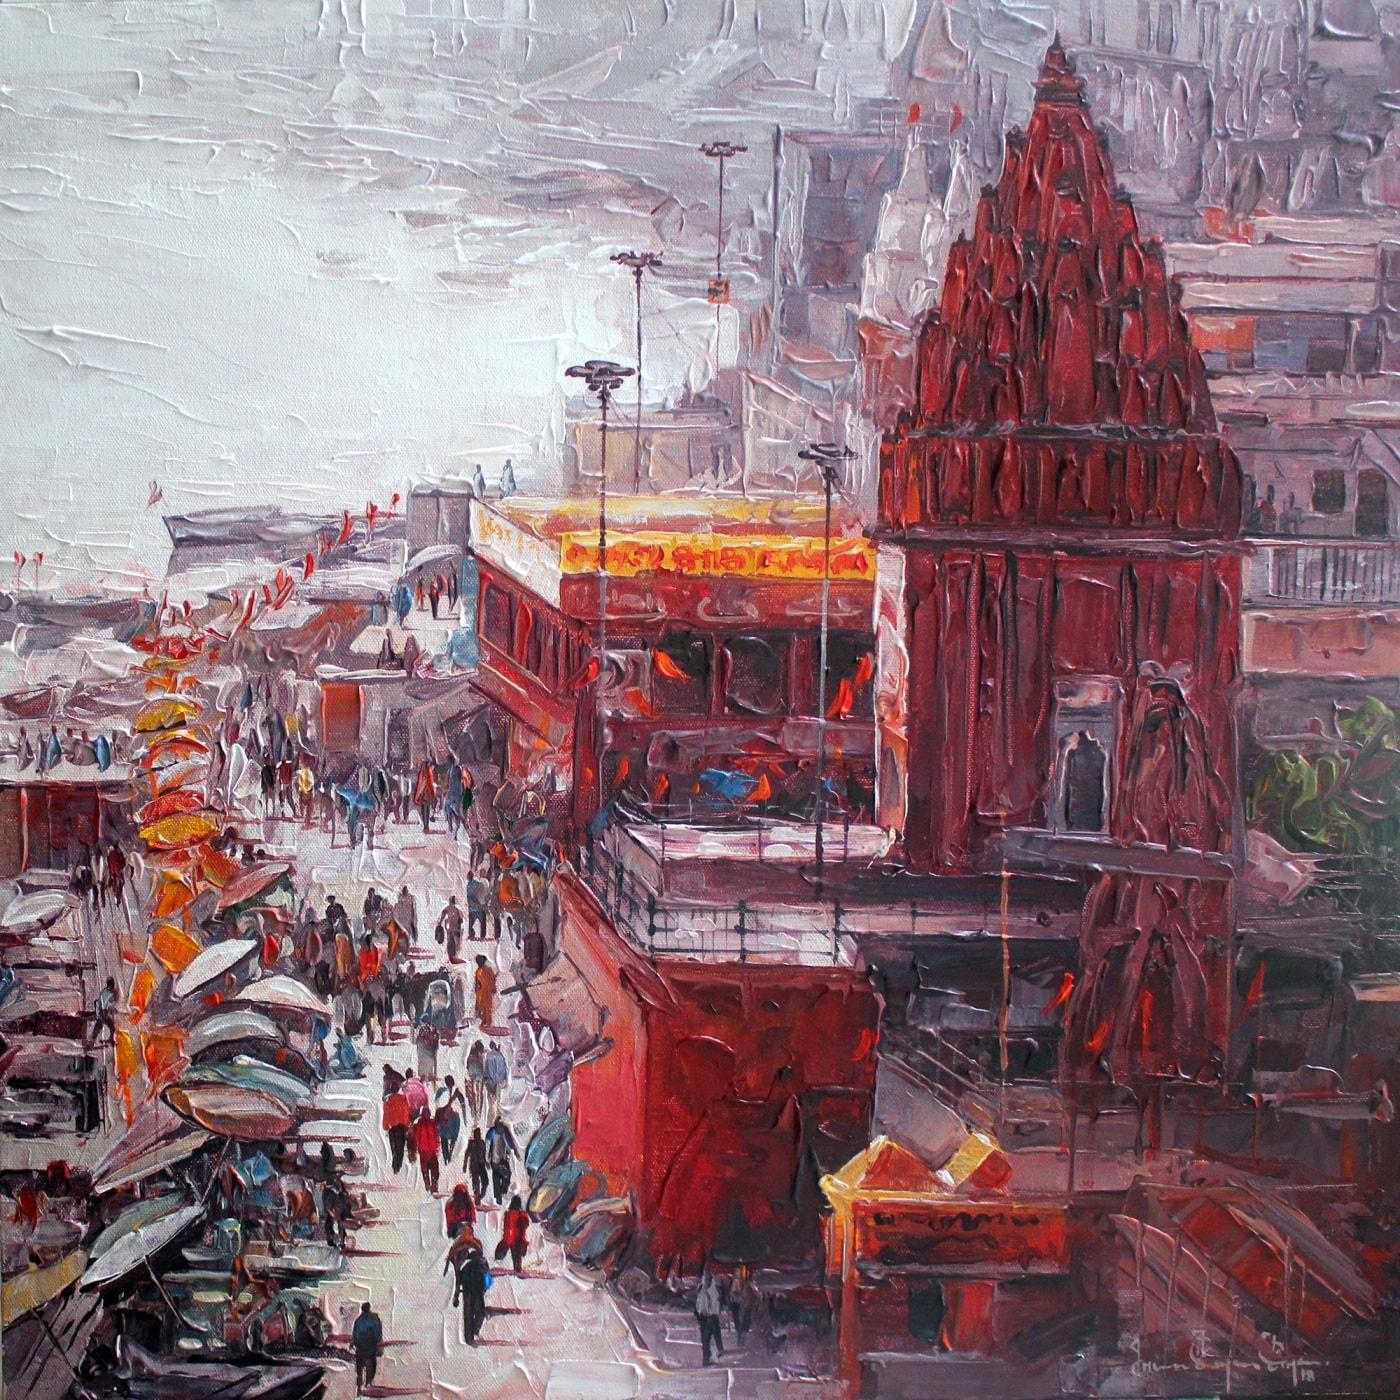 Varanasi, Acrylic on Canvas, Red, Orange by Contemporary Artist "In Stock"